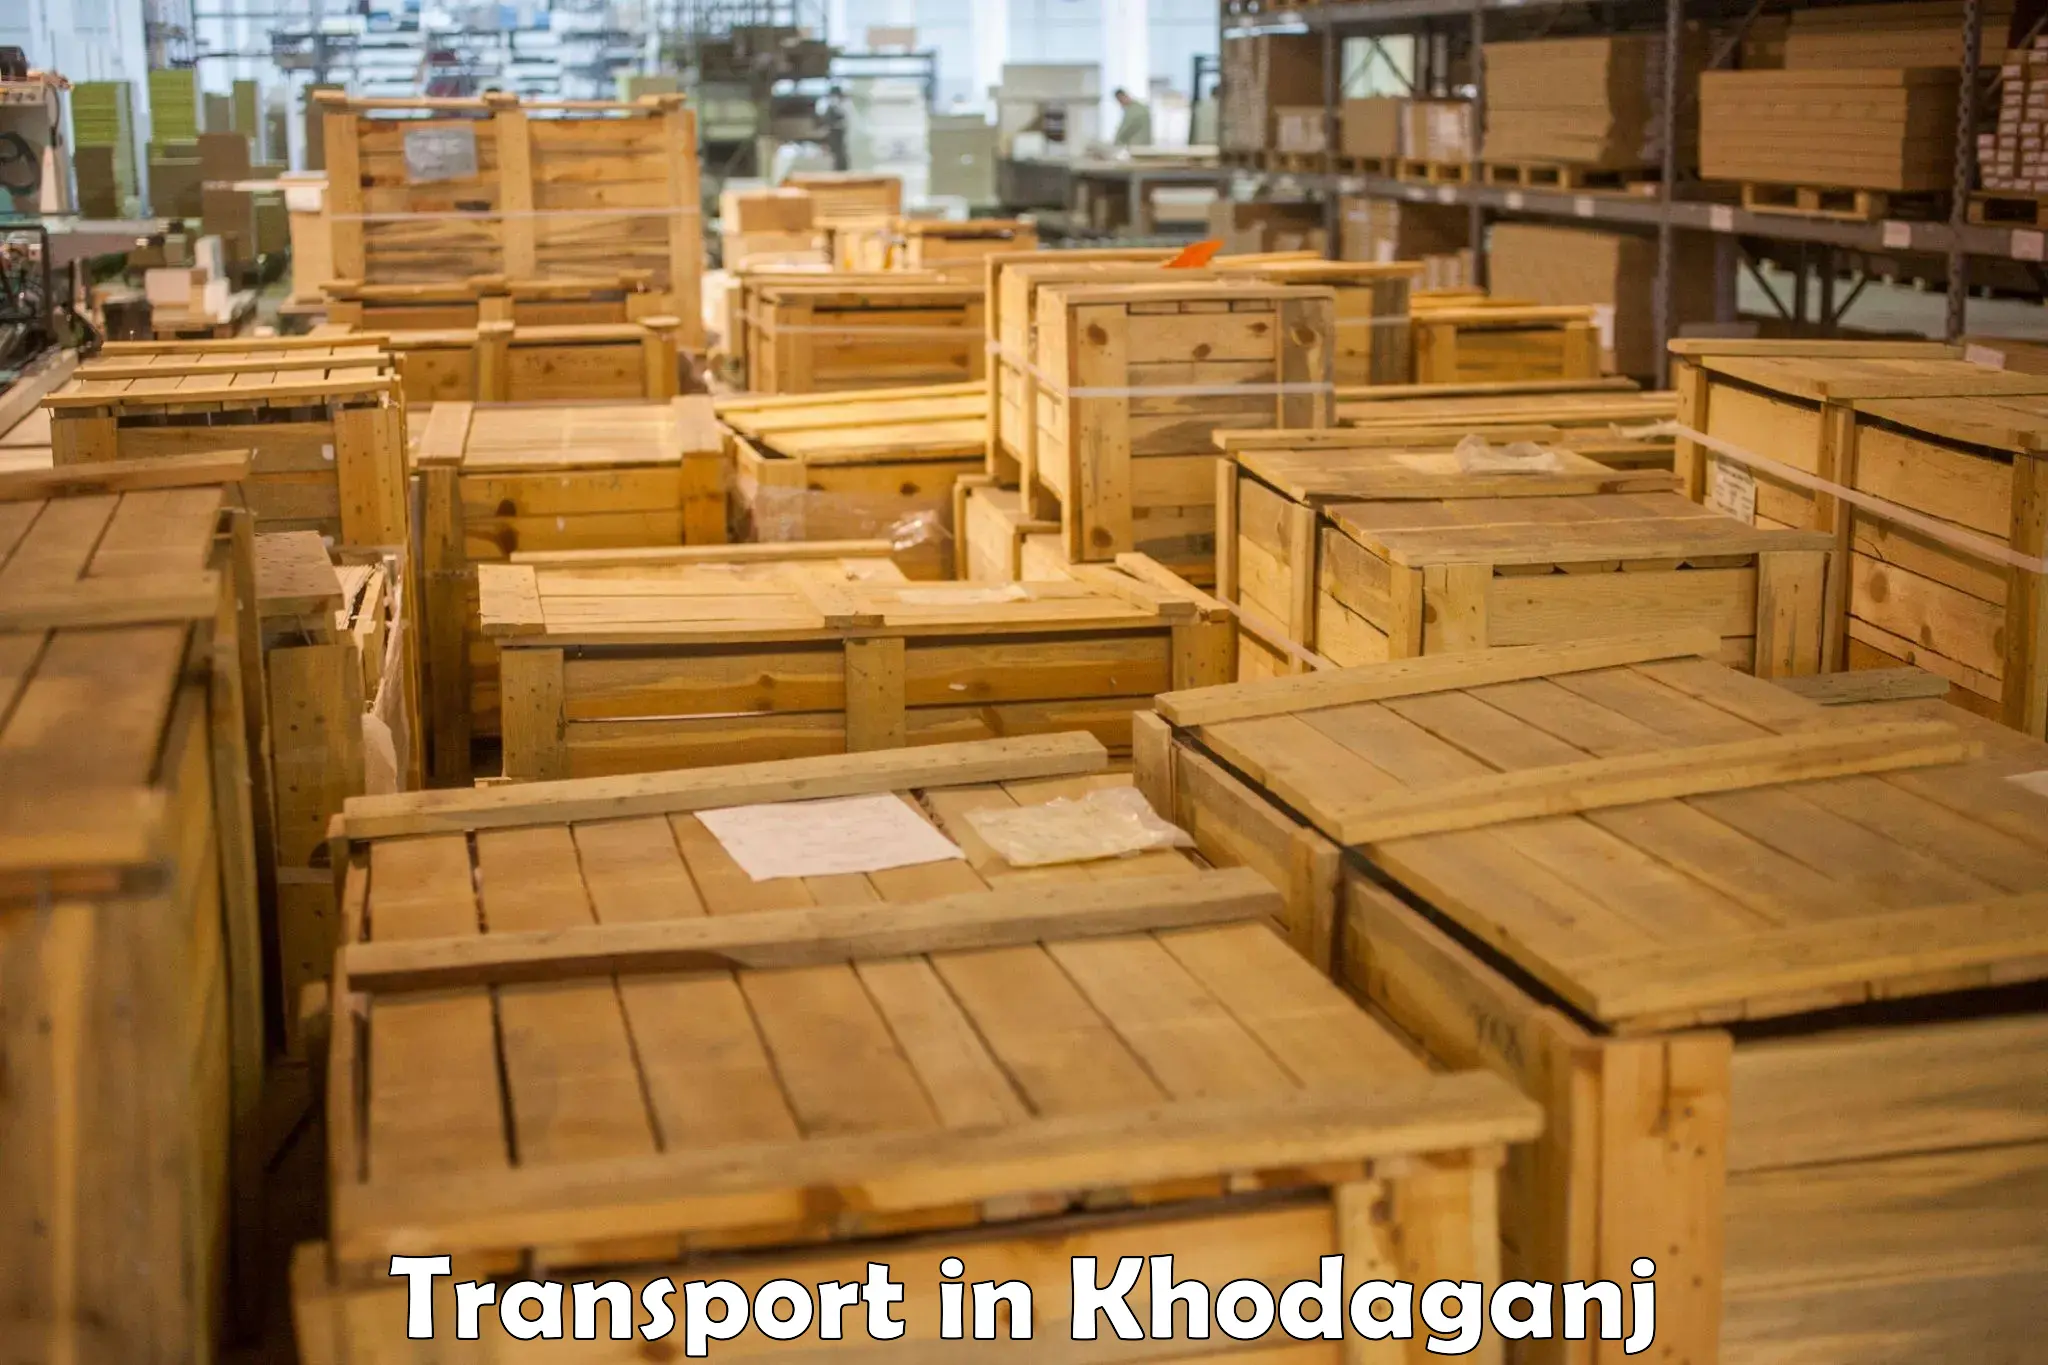 Container transport service in Khodaganj